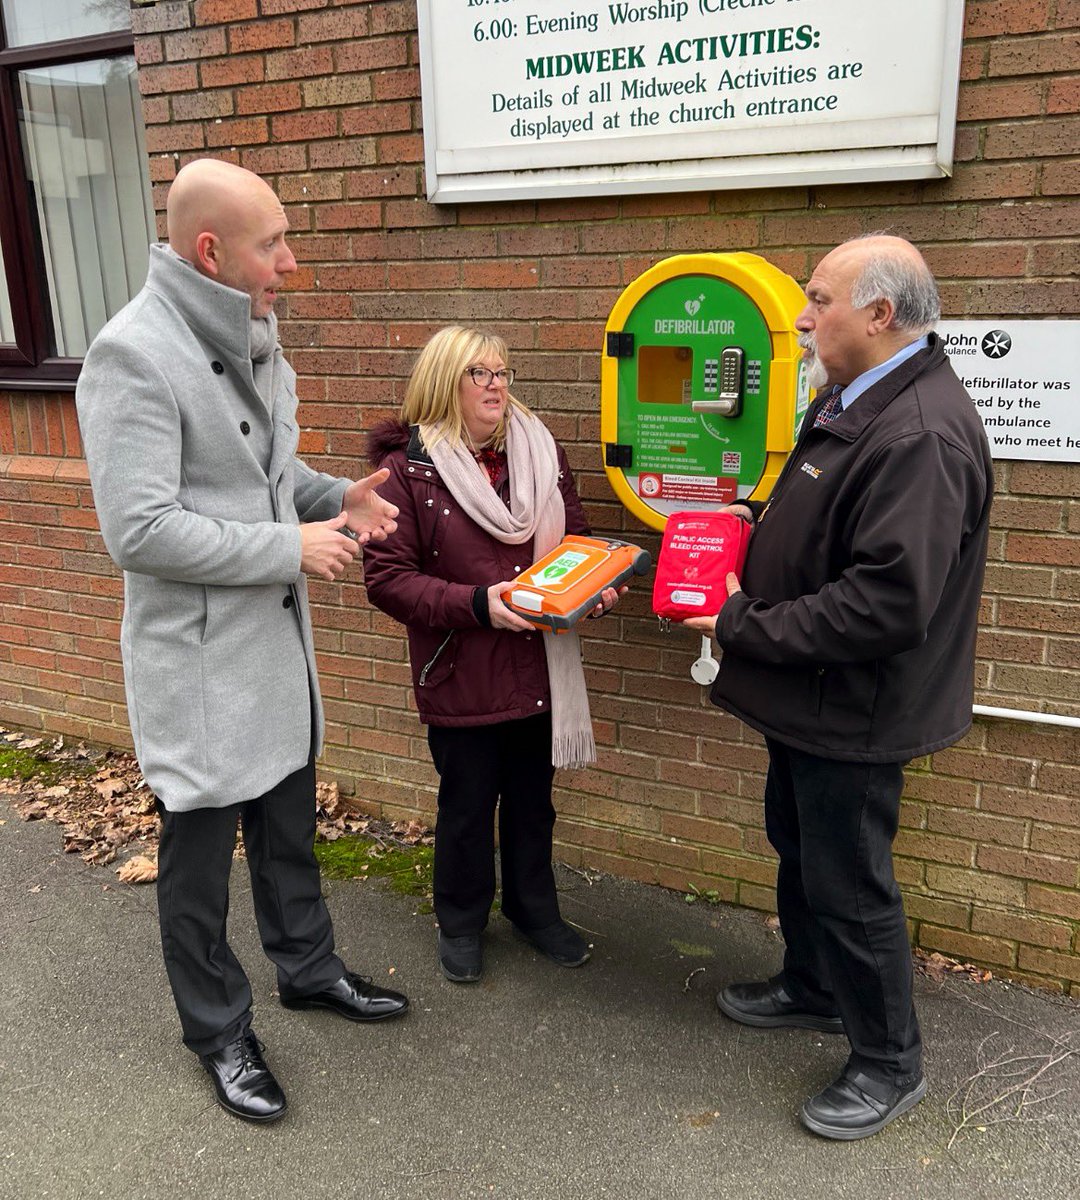 As @cllr_aston is a Paramedic, @littler_carol a St John Ambulance volunteer and Mushtaq an NHS Governor, the wellbeing of local folk will always be our priority. If elected, we pledge to increase the number of defibrillator sites across Upper Gornal, Woodsetton and The Foxyards.